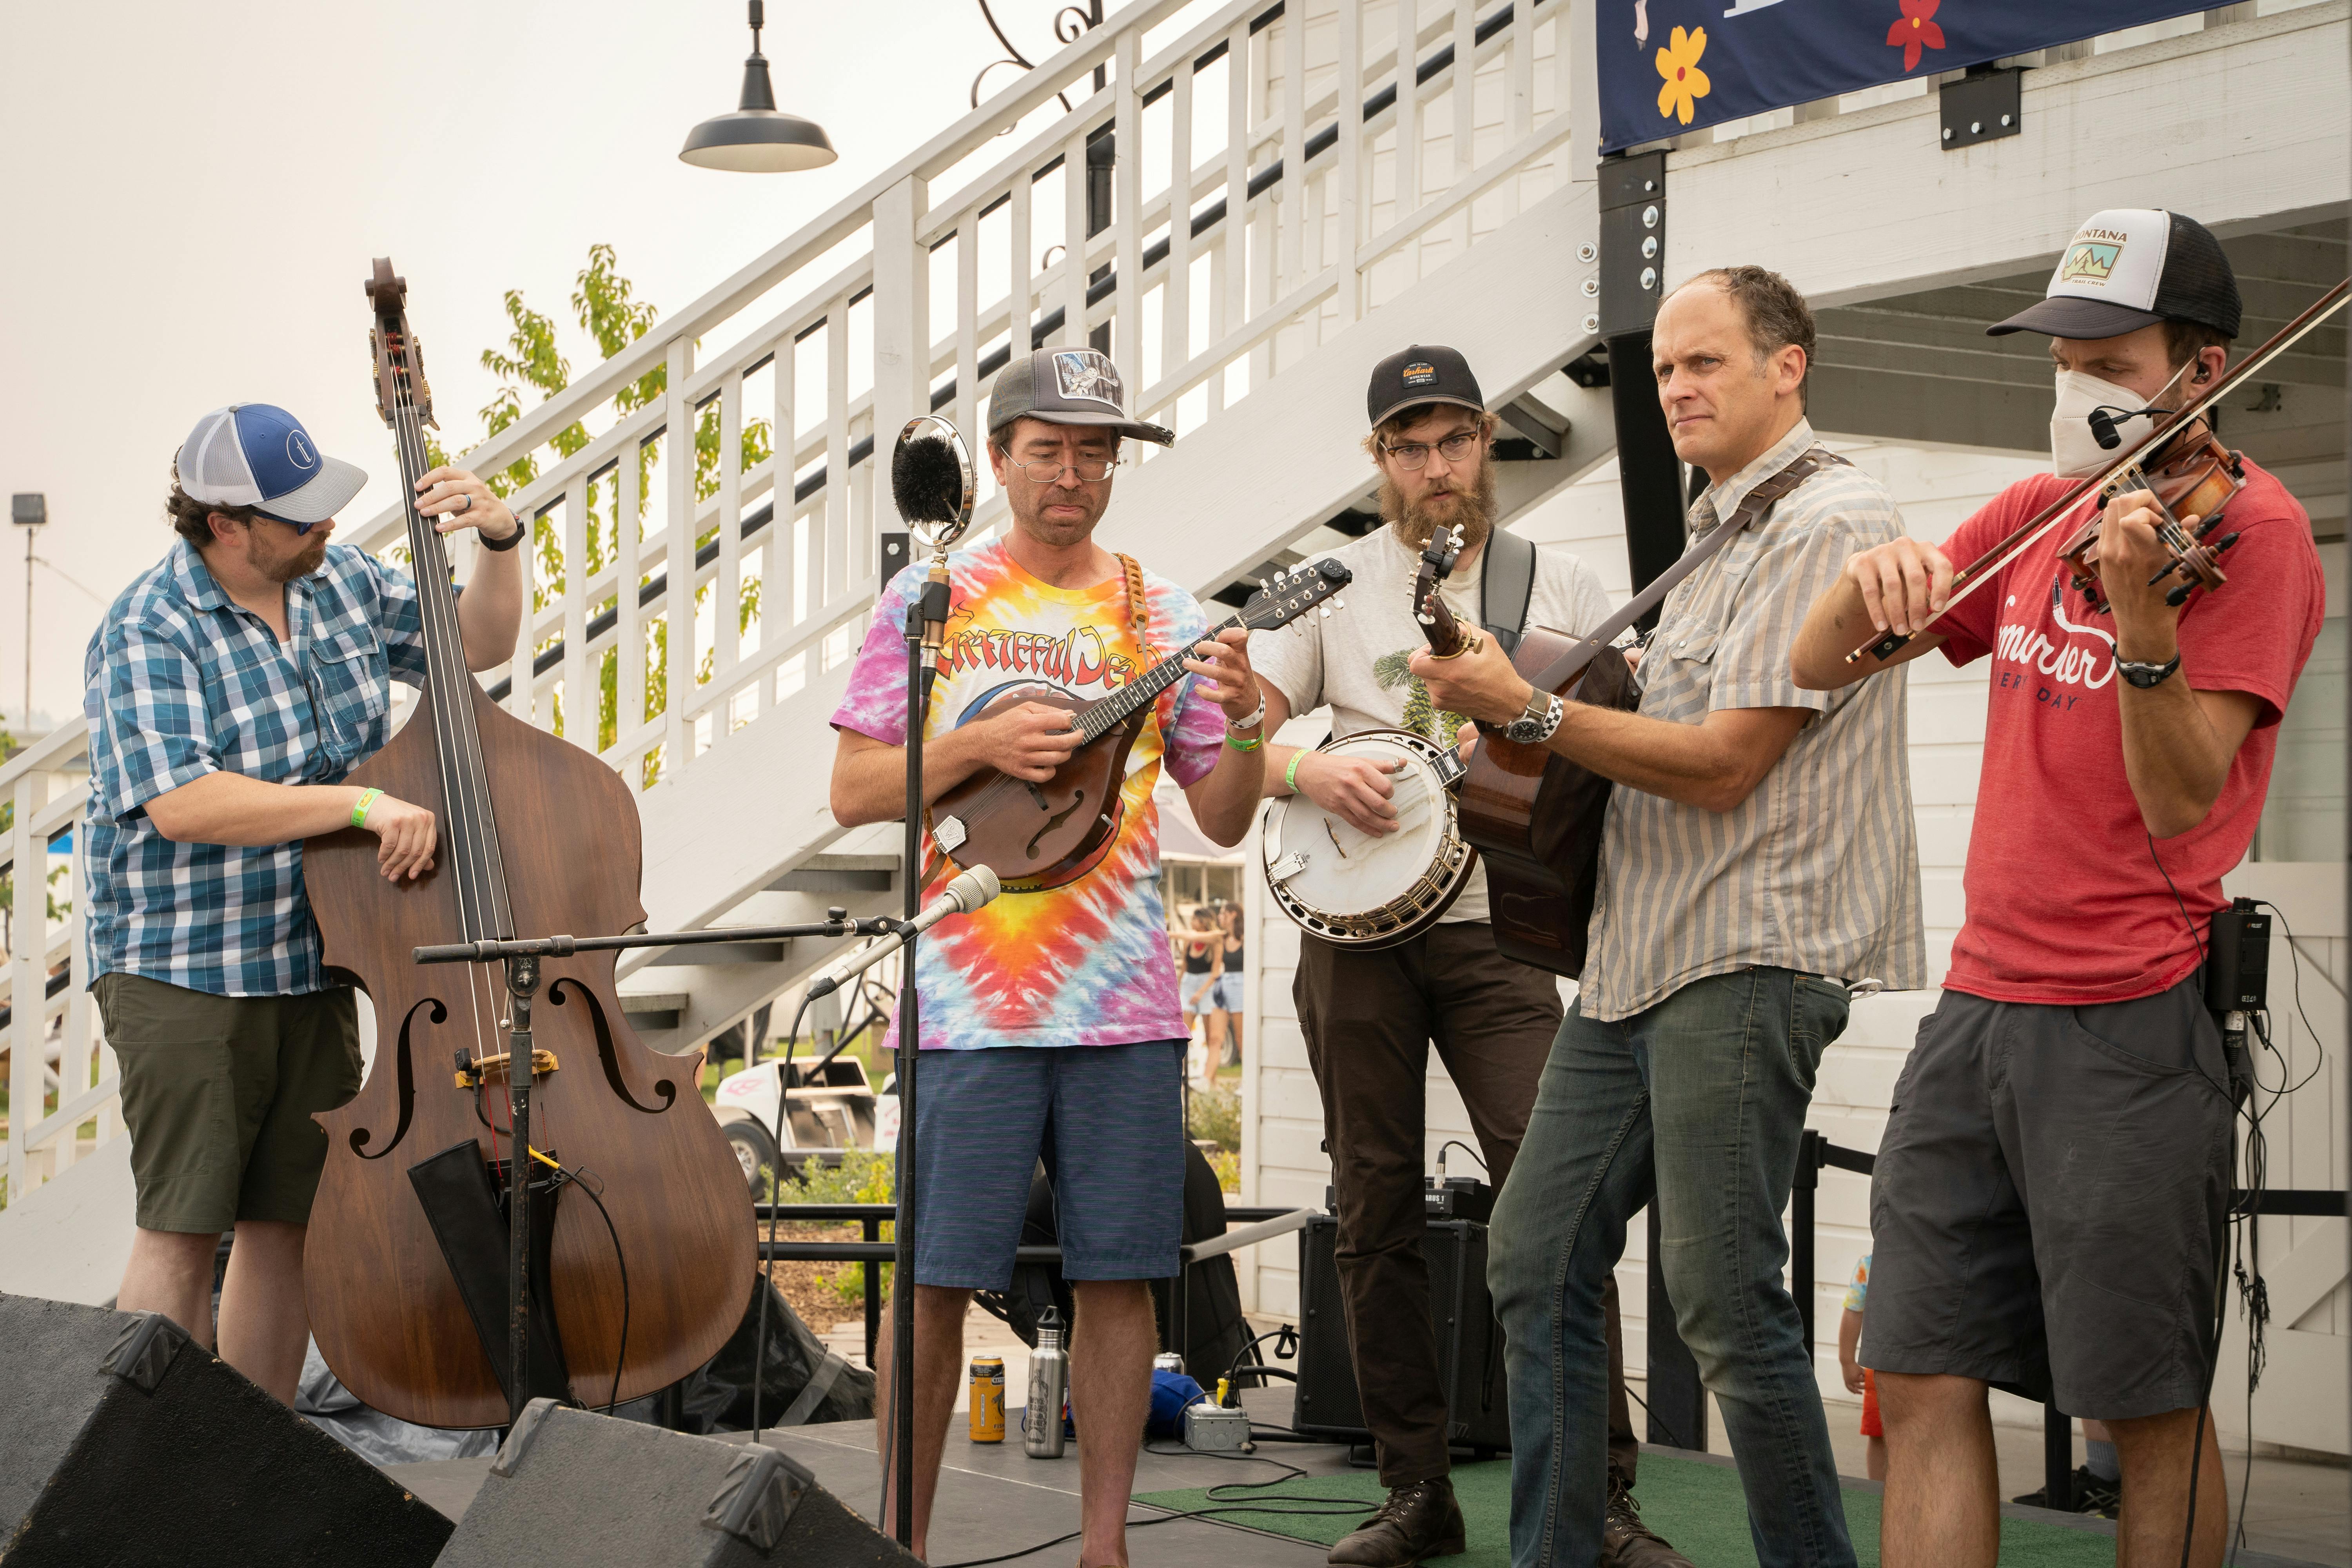 A string band with a bass, mandolin, banjo, guitar and fiddle playing at the Fair on a sunny day.